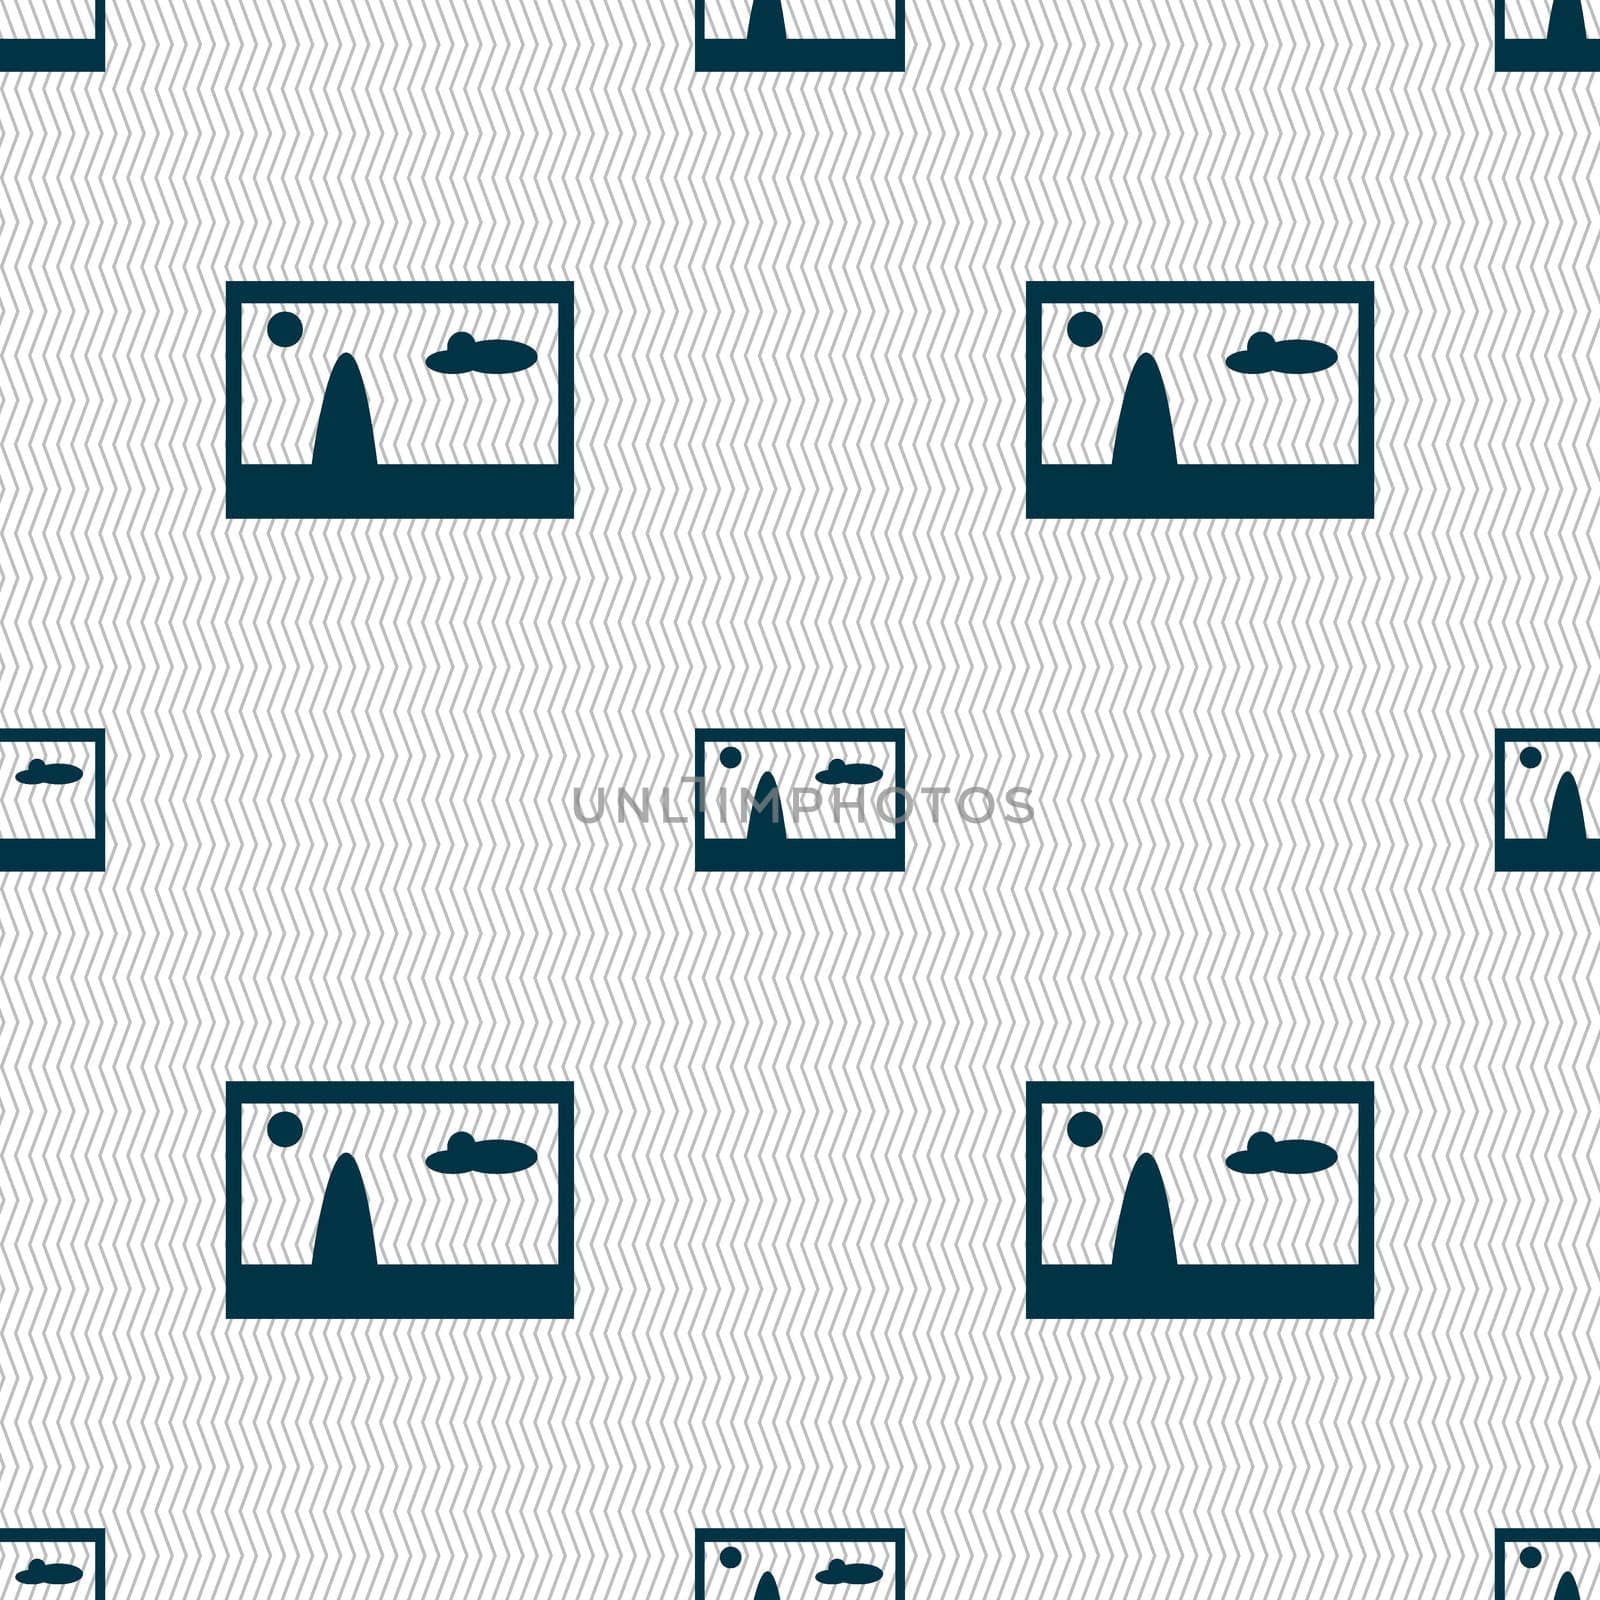 File JPG sign icon. Download image file symbol. Seamless abstract background with geometric shapes. illustration